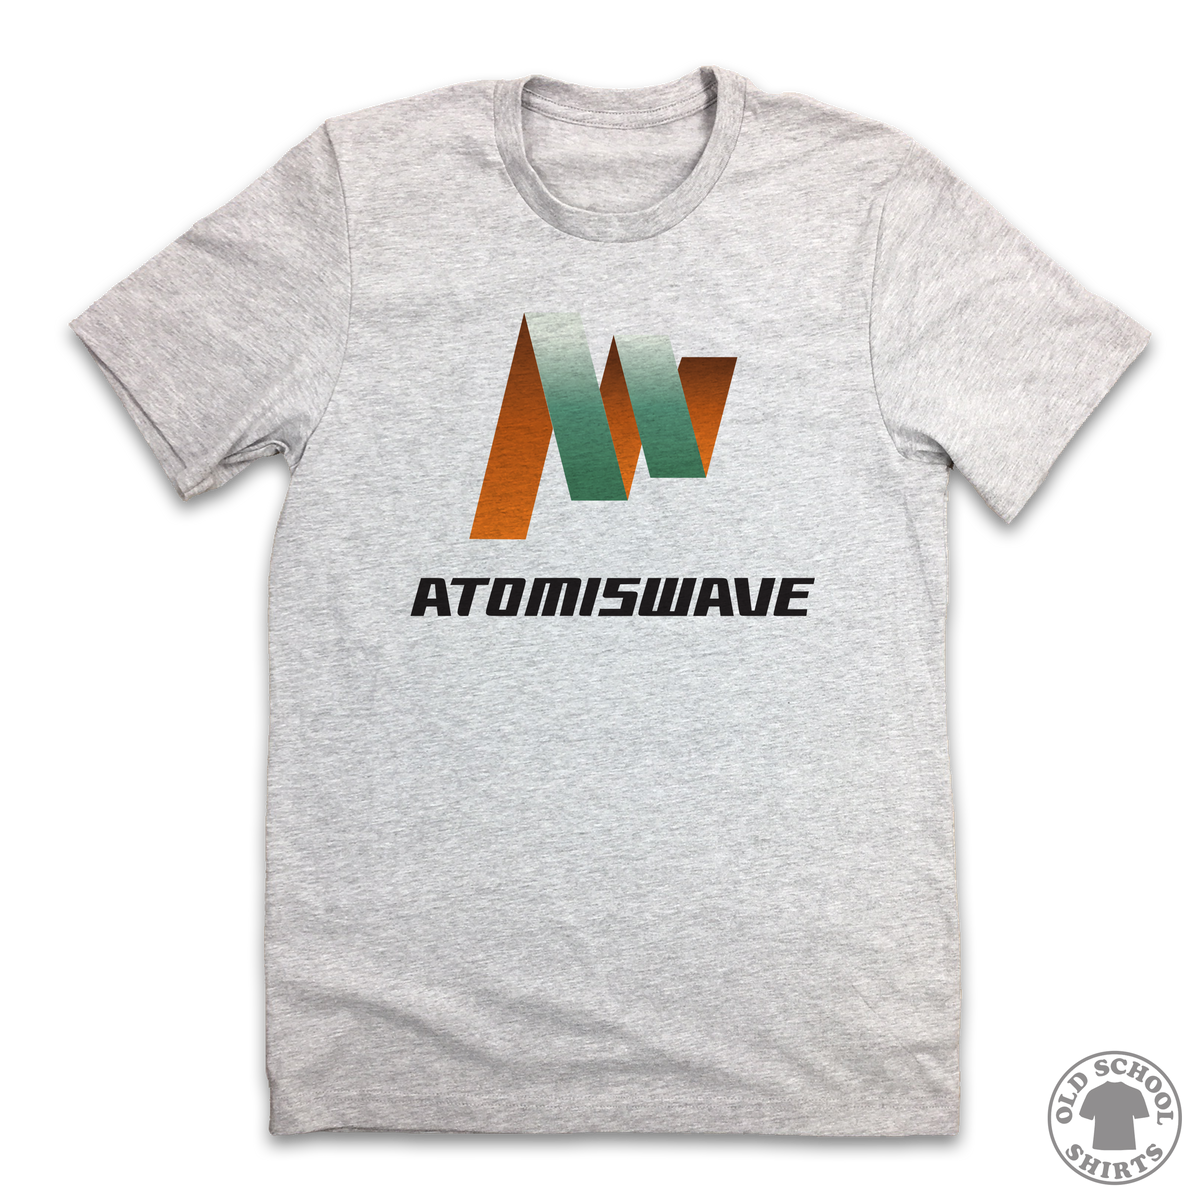 Atomiswave - Old School Shirts- Retro Sports T Shirts